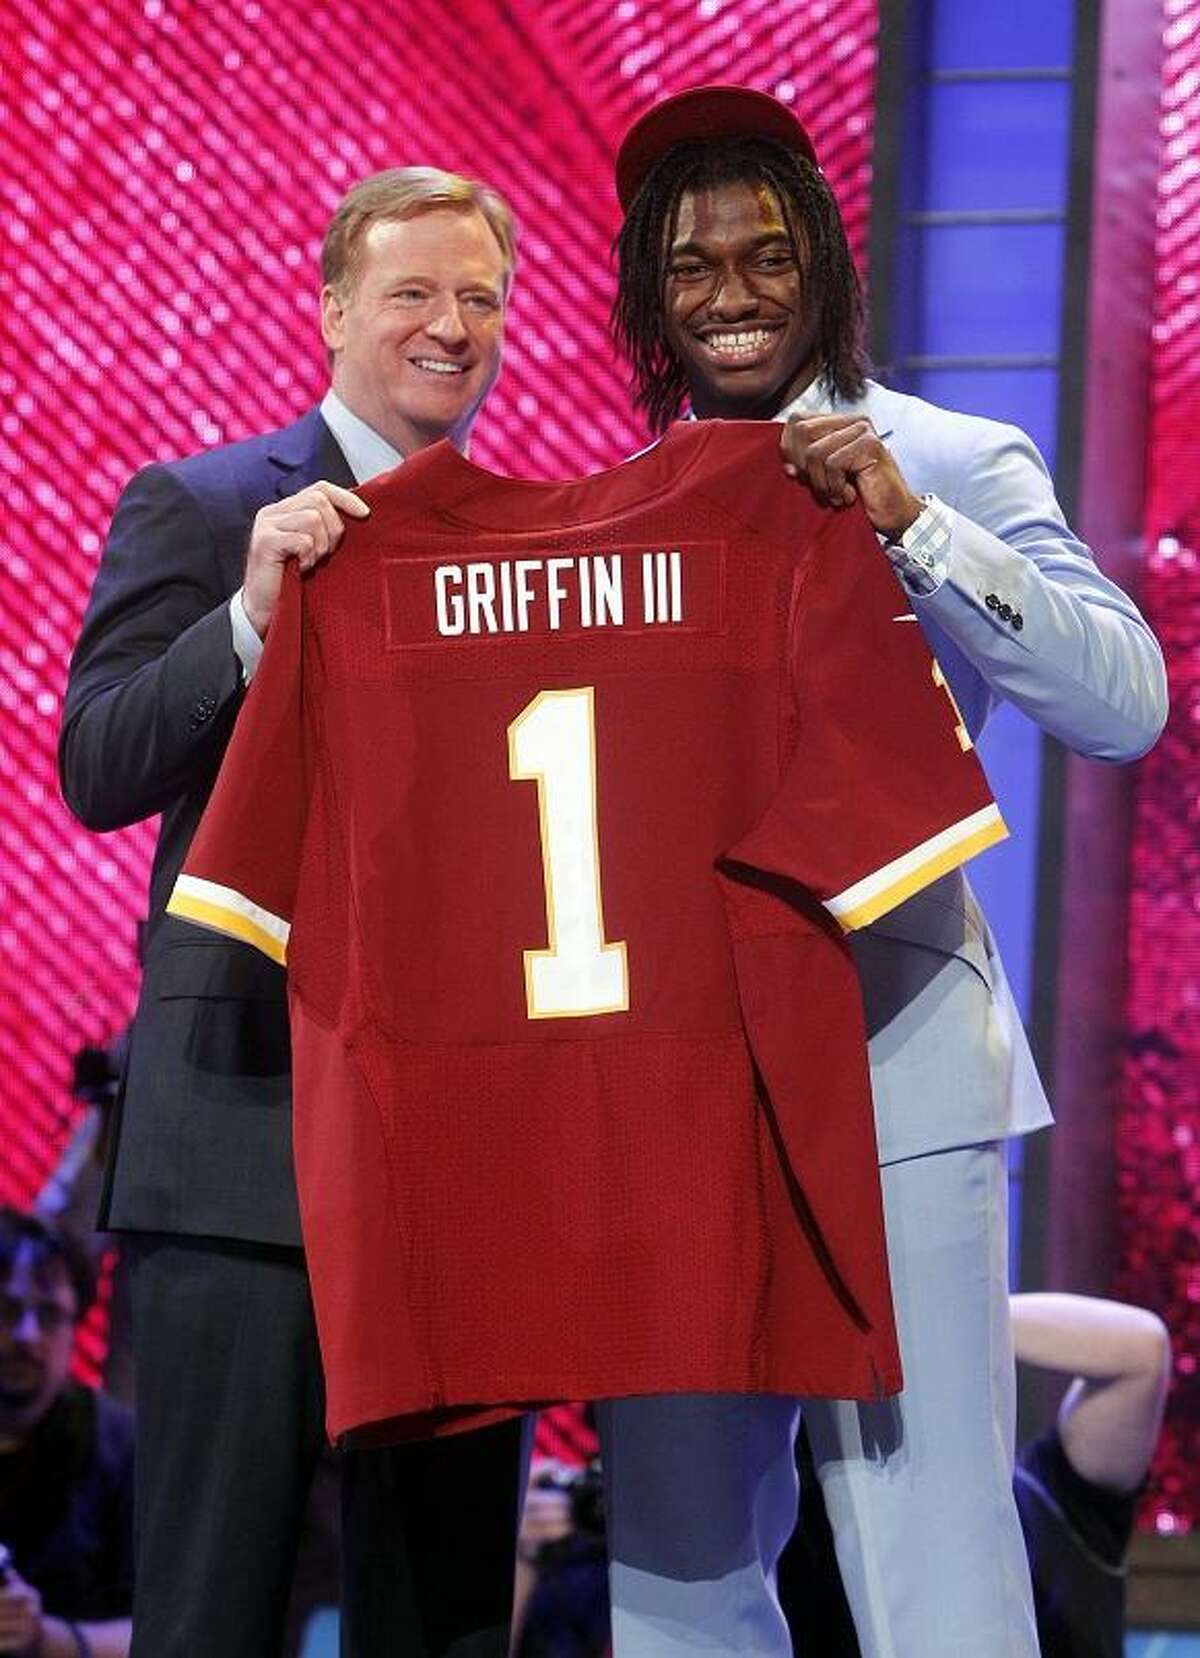 NFL DRAFT: Luck, Griffin III taken with top two picks to nobody's surprise